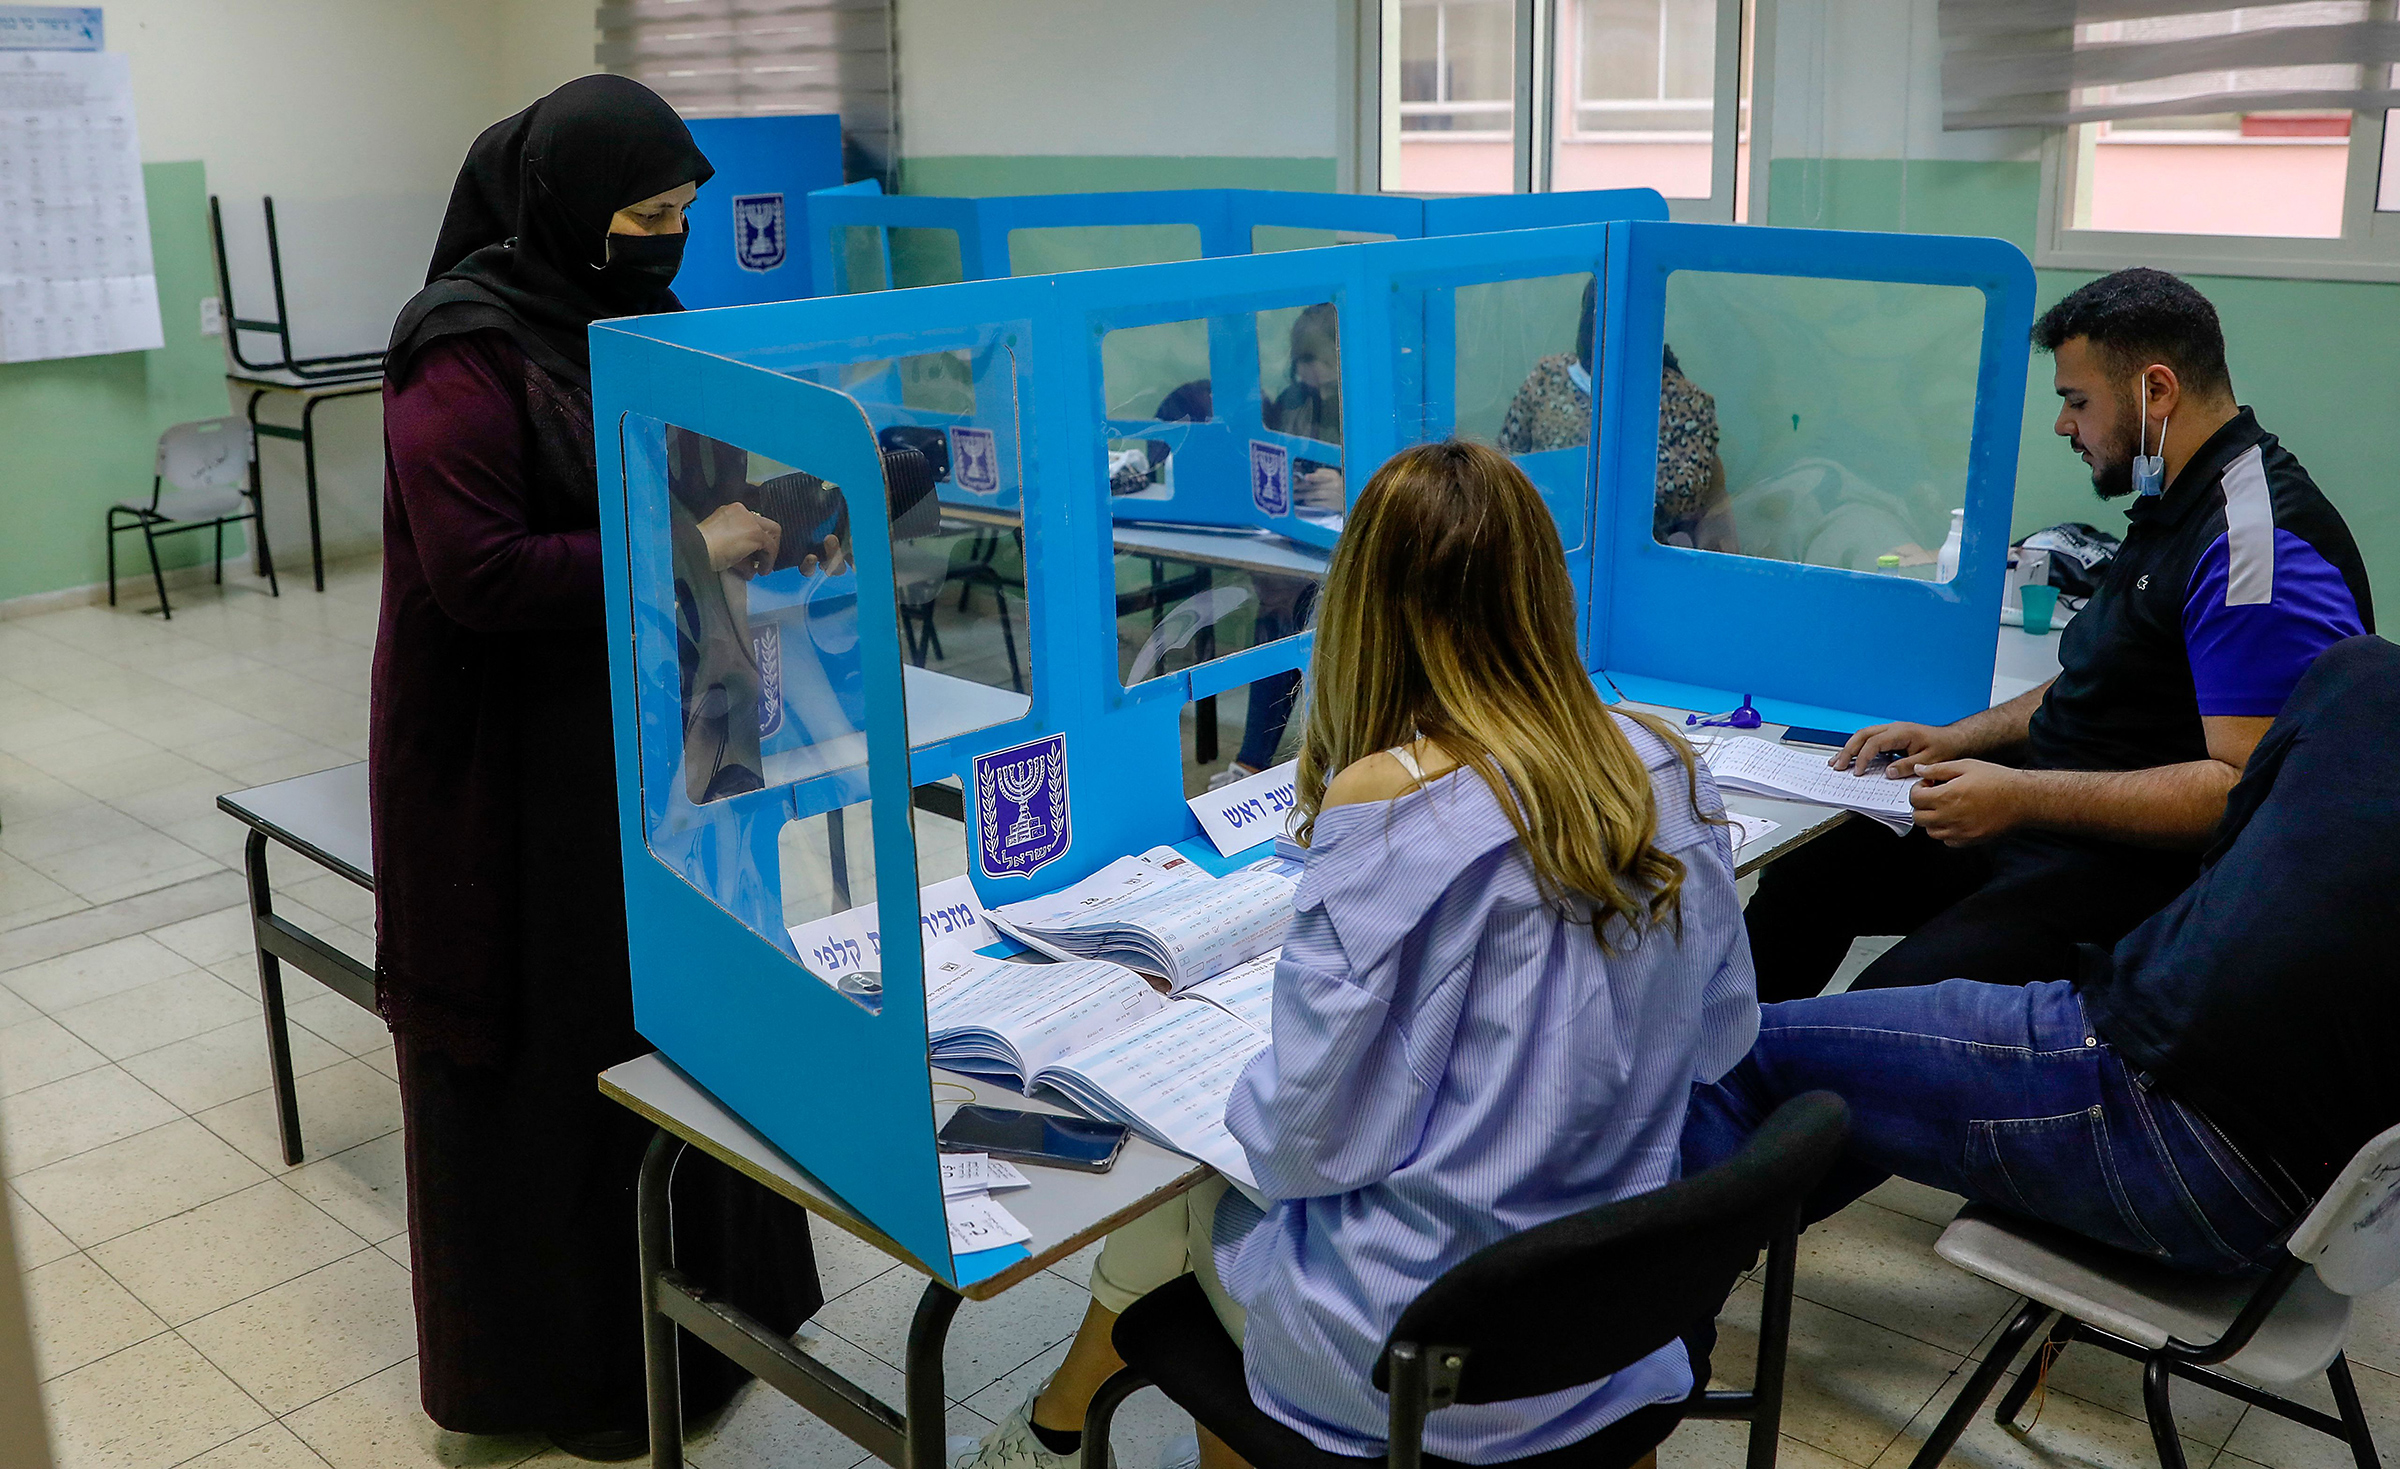 An Israeli Arab voter casts her ballot at a polling station in Kafr Manda, 16 kilometres northwest of Nazareth, on March 23, 2021. (Ahmad Gharabli—AFP/Getty Images)